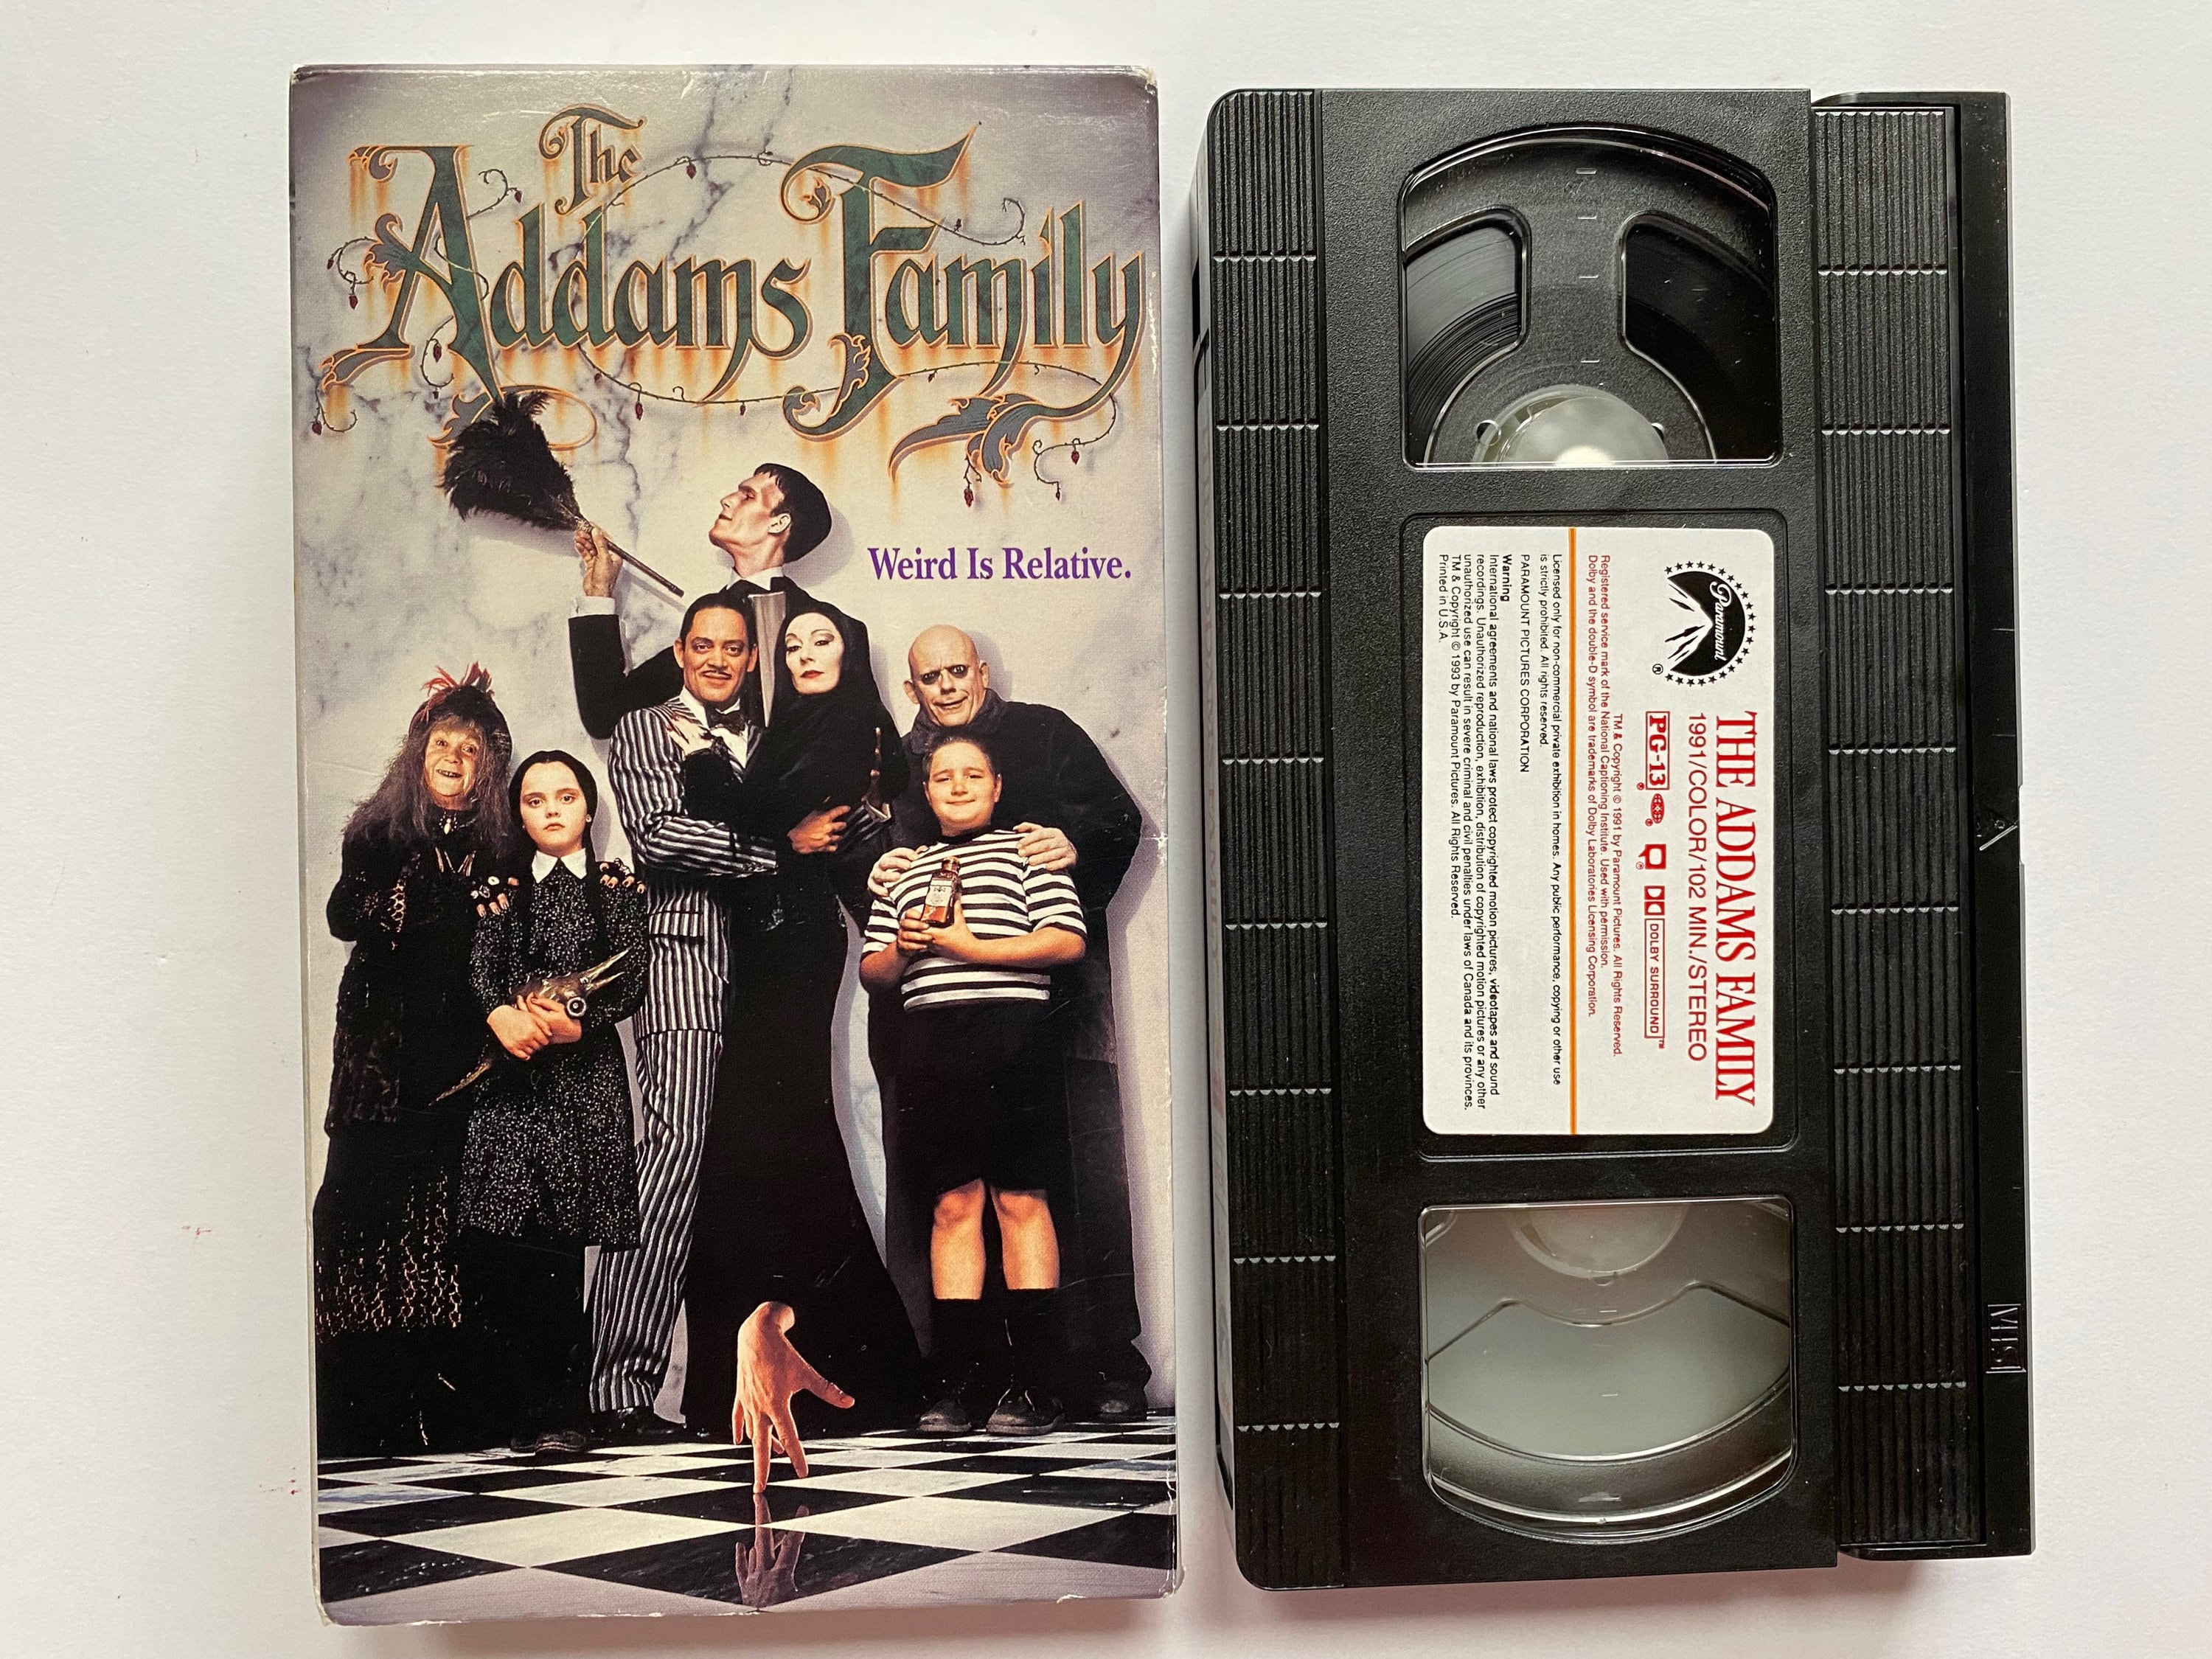 1993 the Addams Family VHS Video Tape Movie Tested Working Xxx Pic Hd